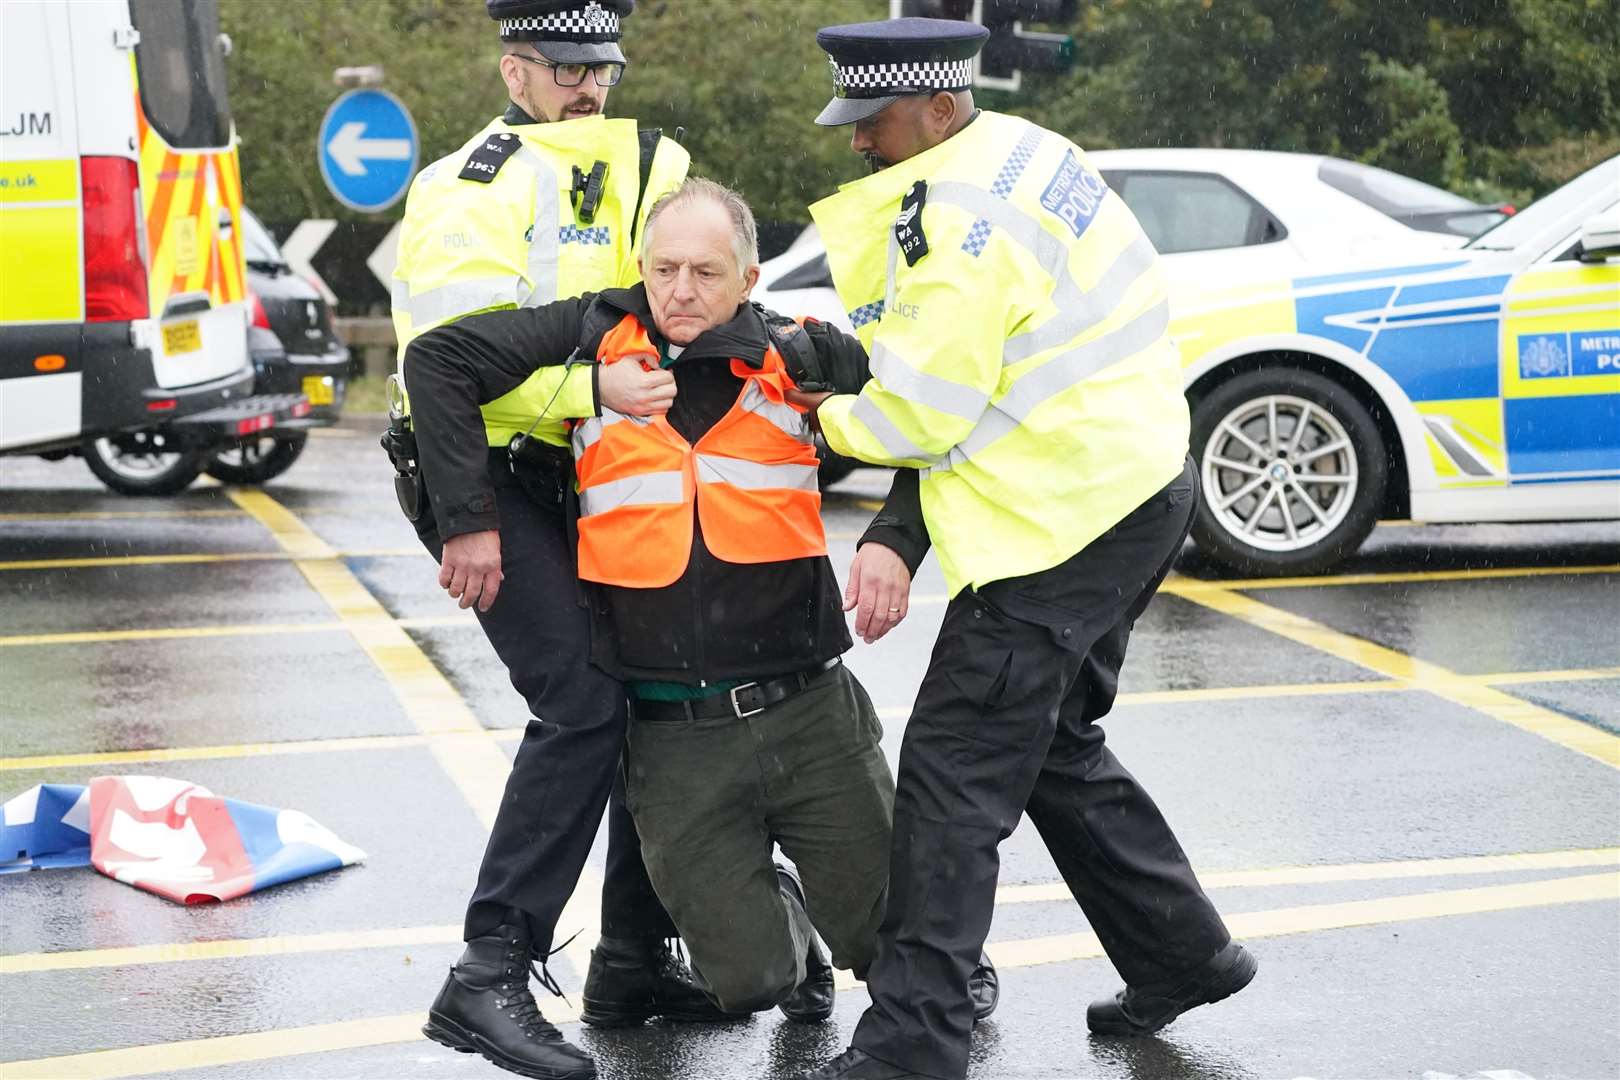 Police officers detain a protester from Insulate Britain occupying a roundabout leading from the M25 motorway to Heathrow Airport in London (Steve Parsons/PA)